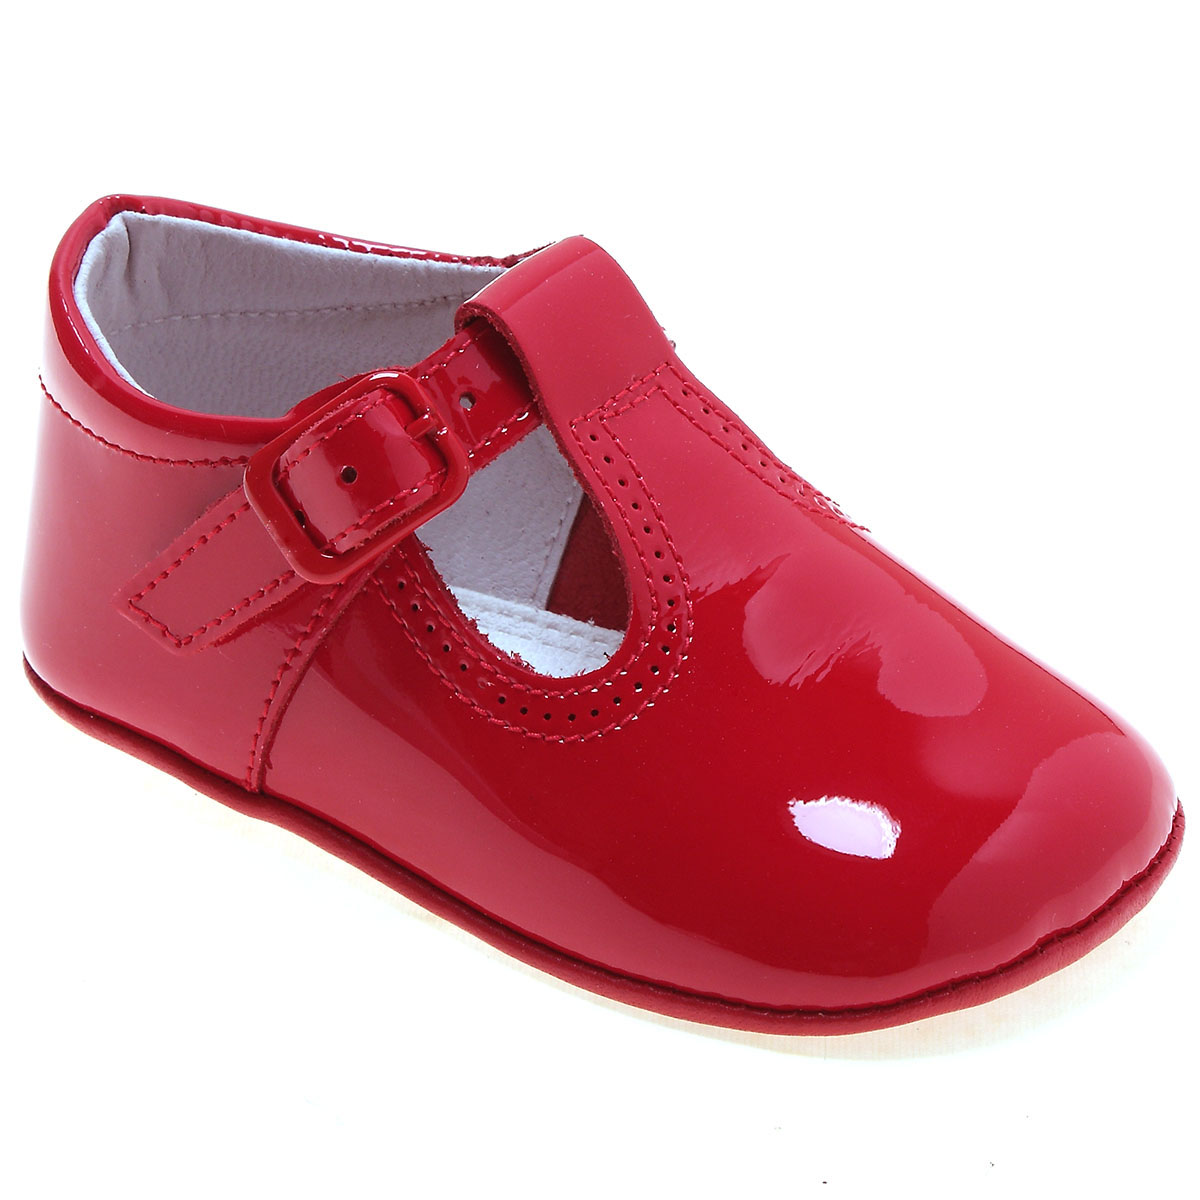 red baby shoes